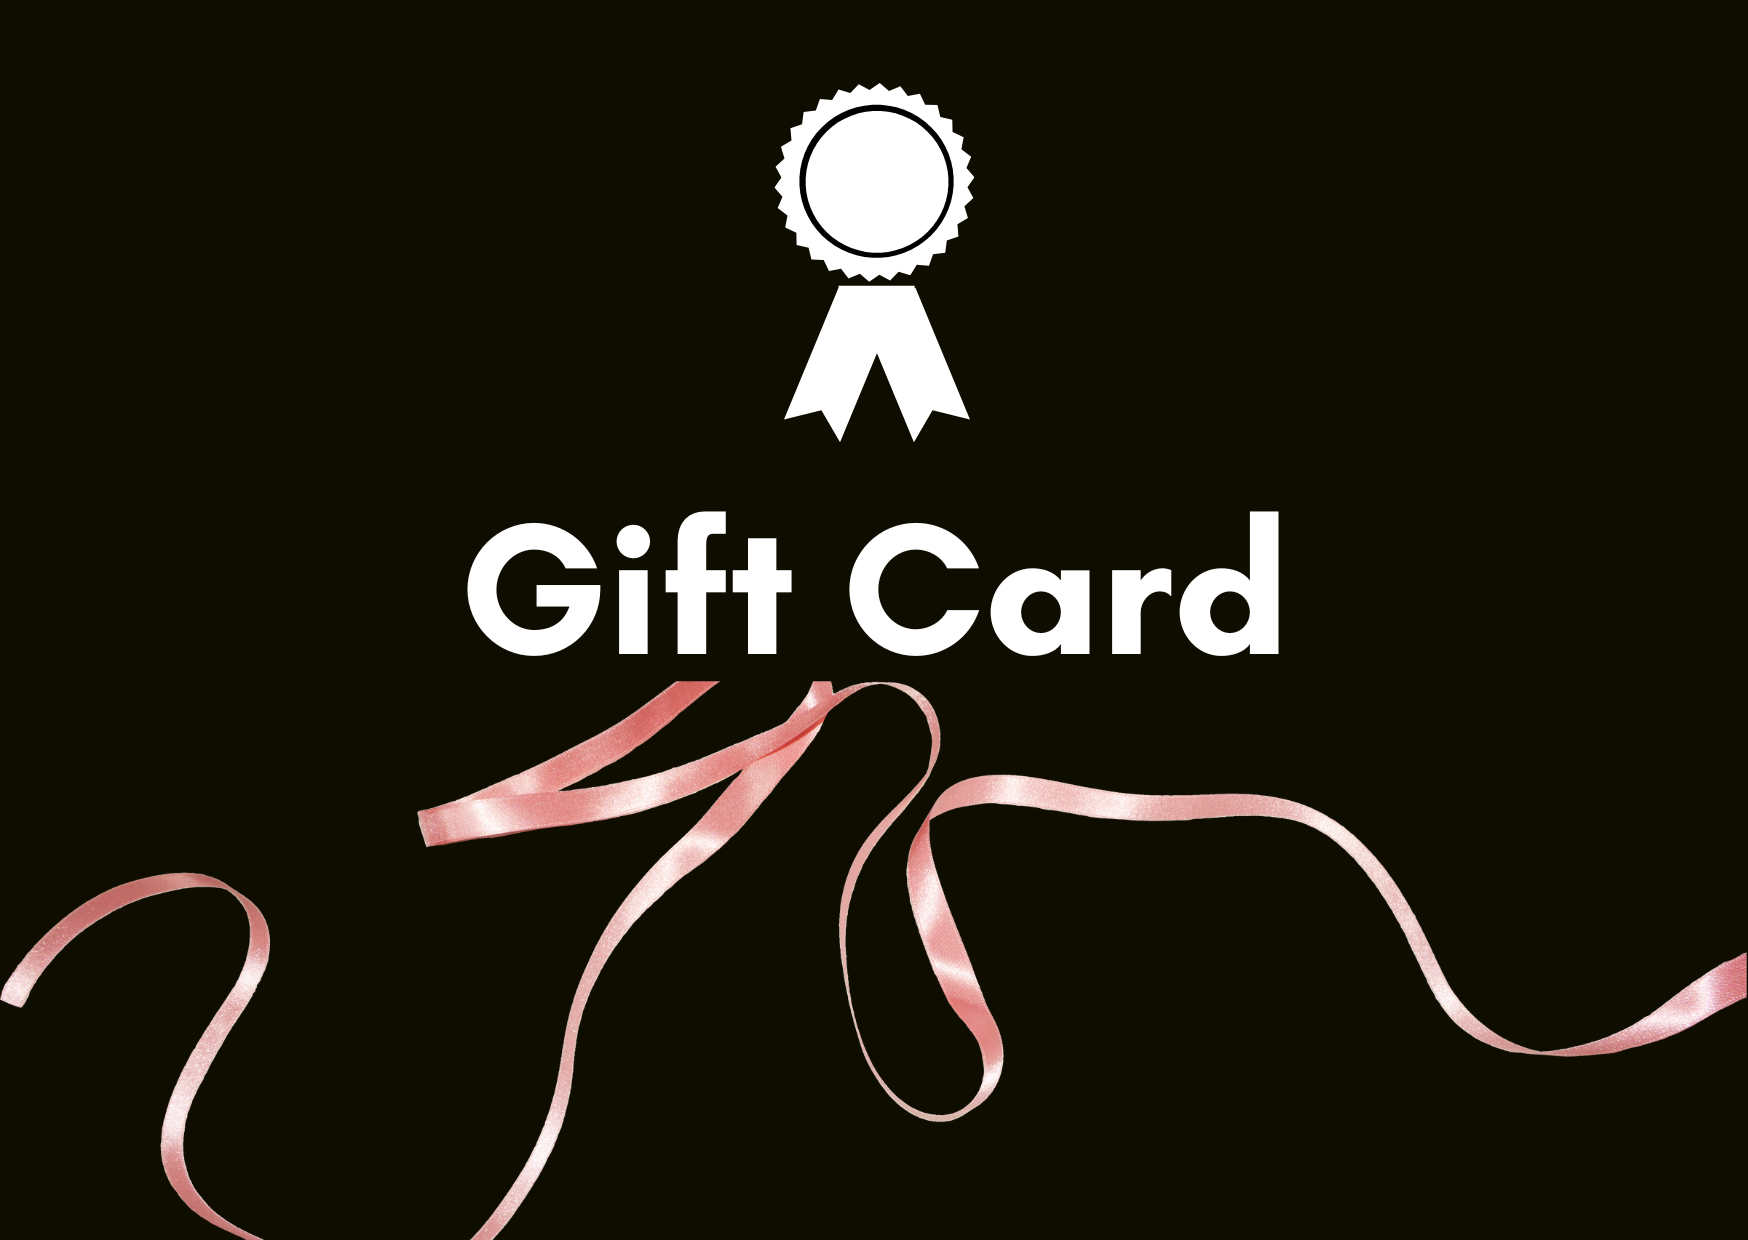 Candle offers gift card chantic candles